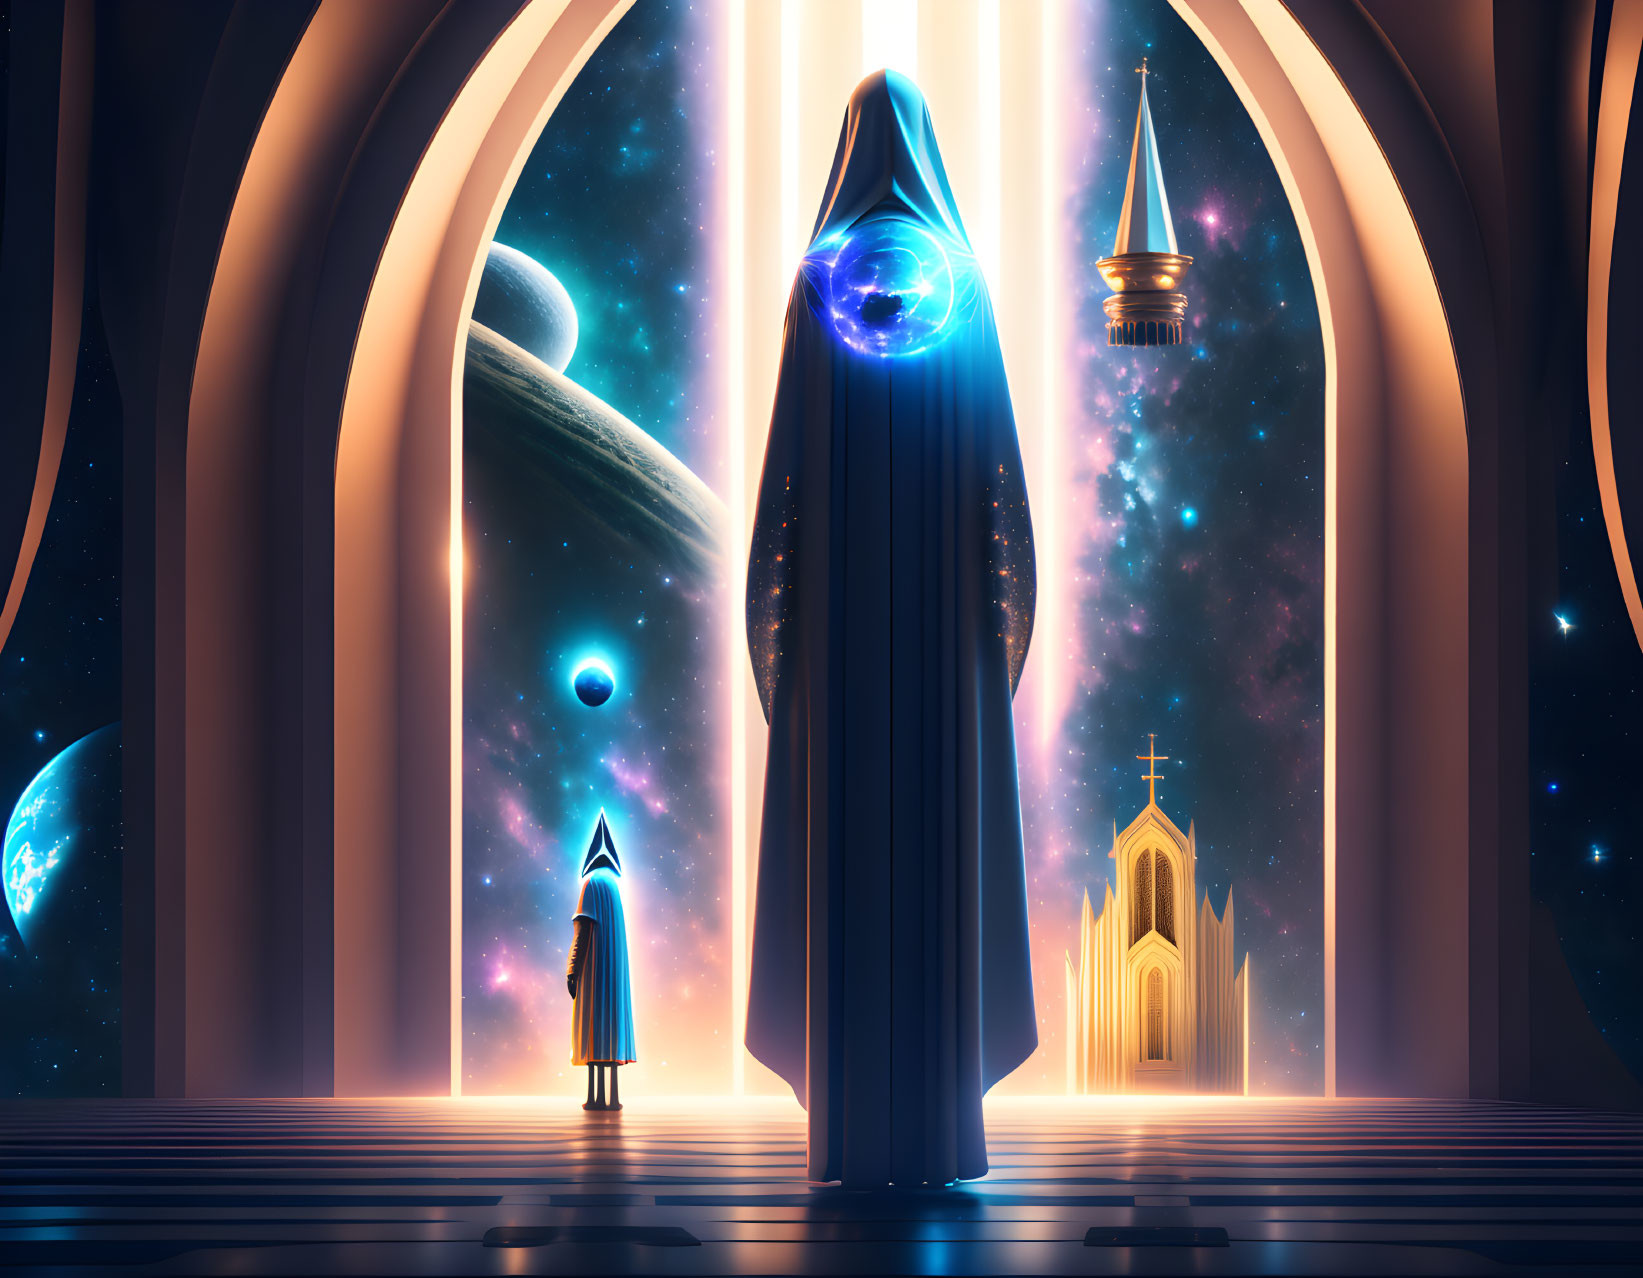 Sci-fi scene featuring robed figures in grand hall with space view & planetary structures